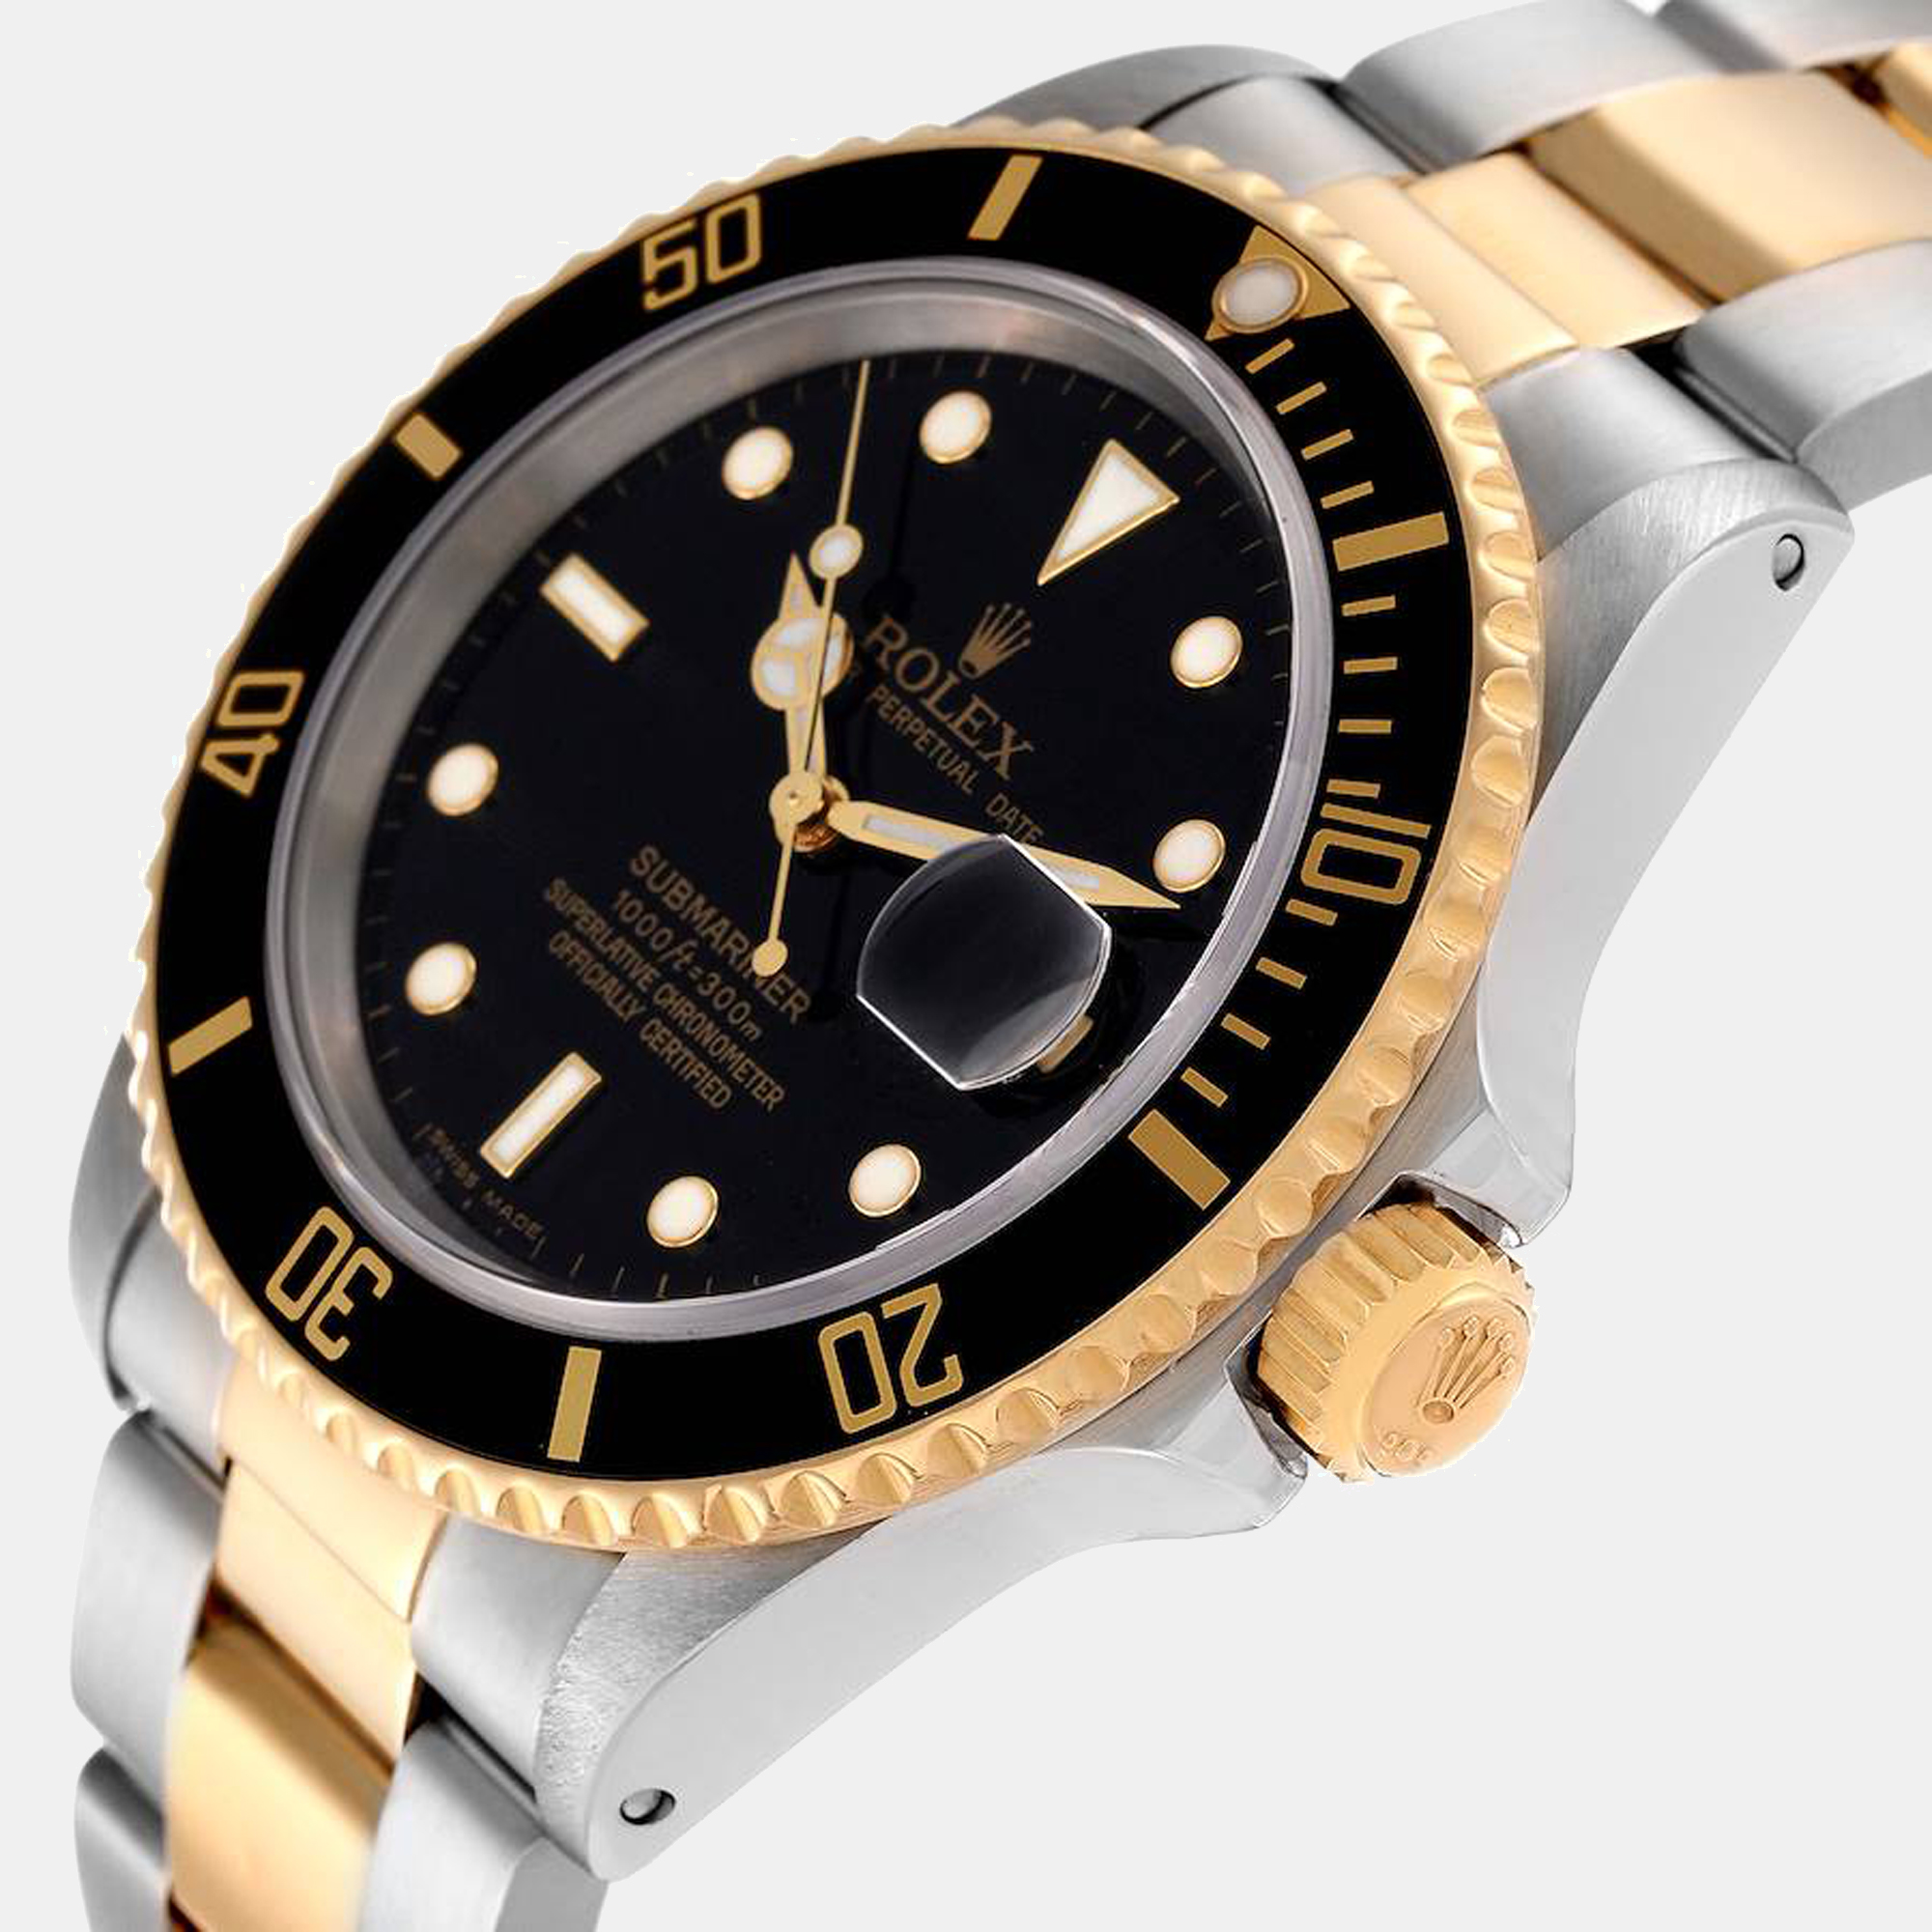 

Rolex Black 18K Yellow Gold And Stainless Steel Submariner 16803 Men's Wristwatch 40 mm